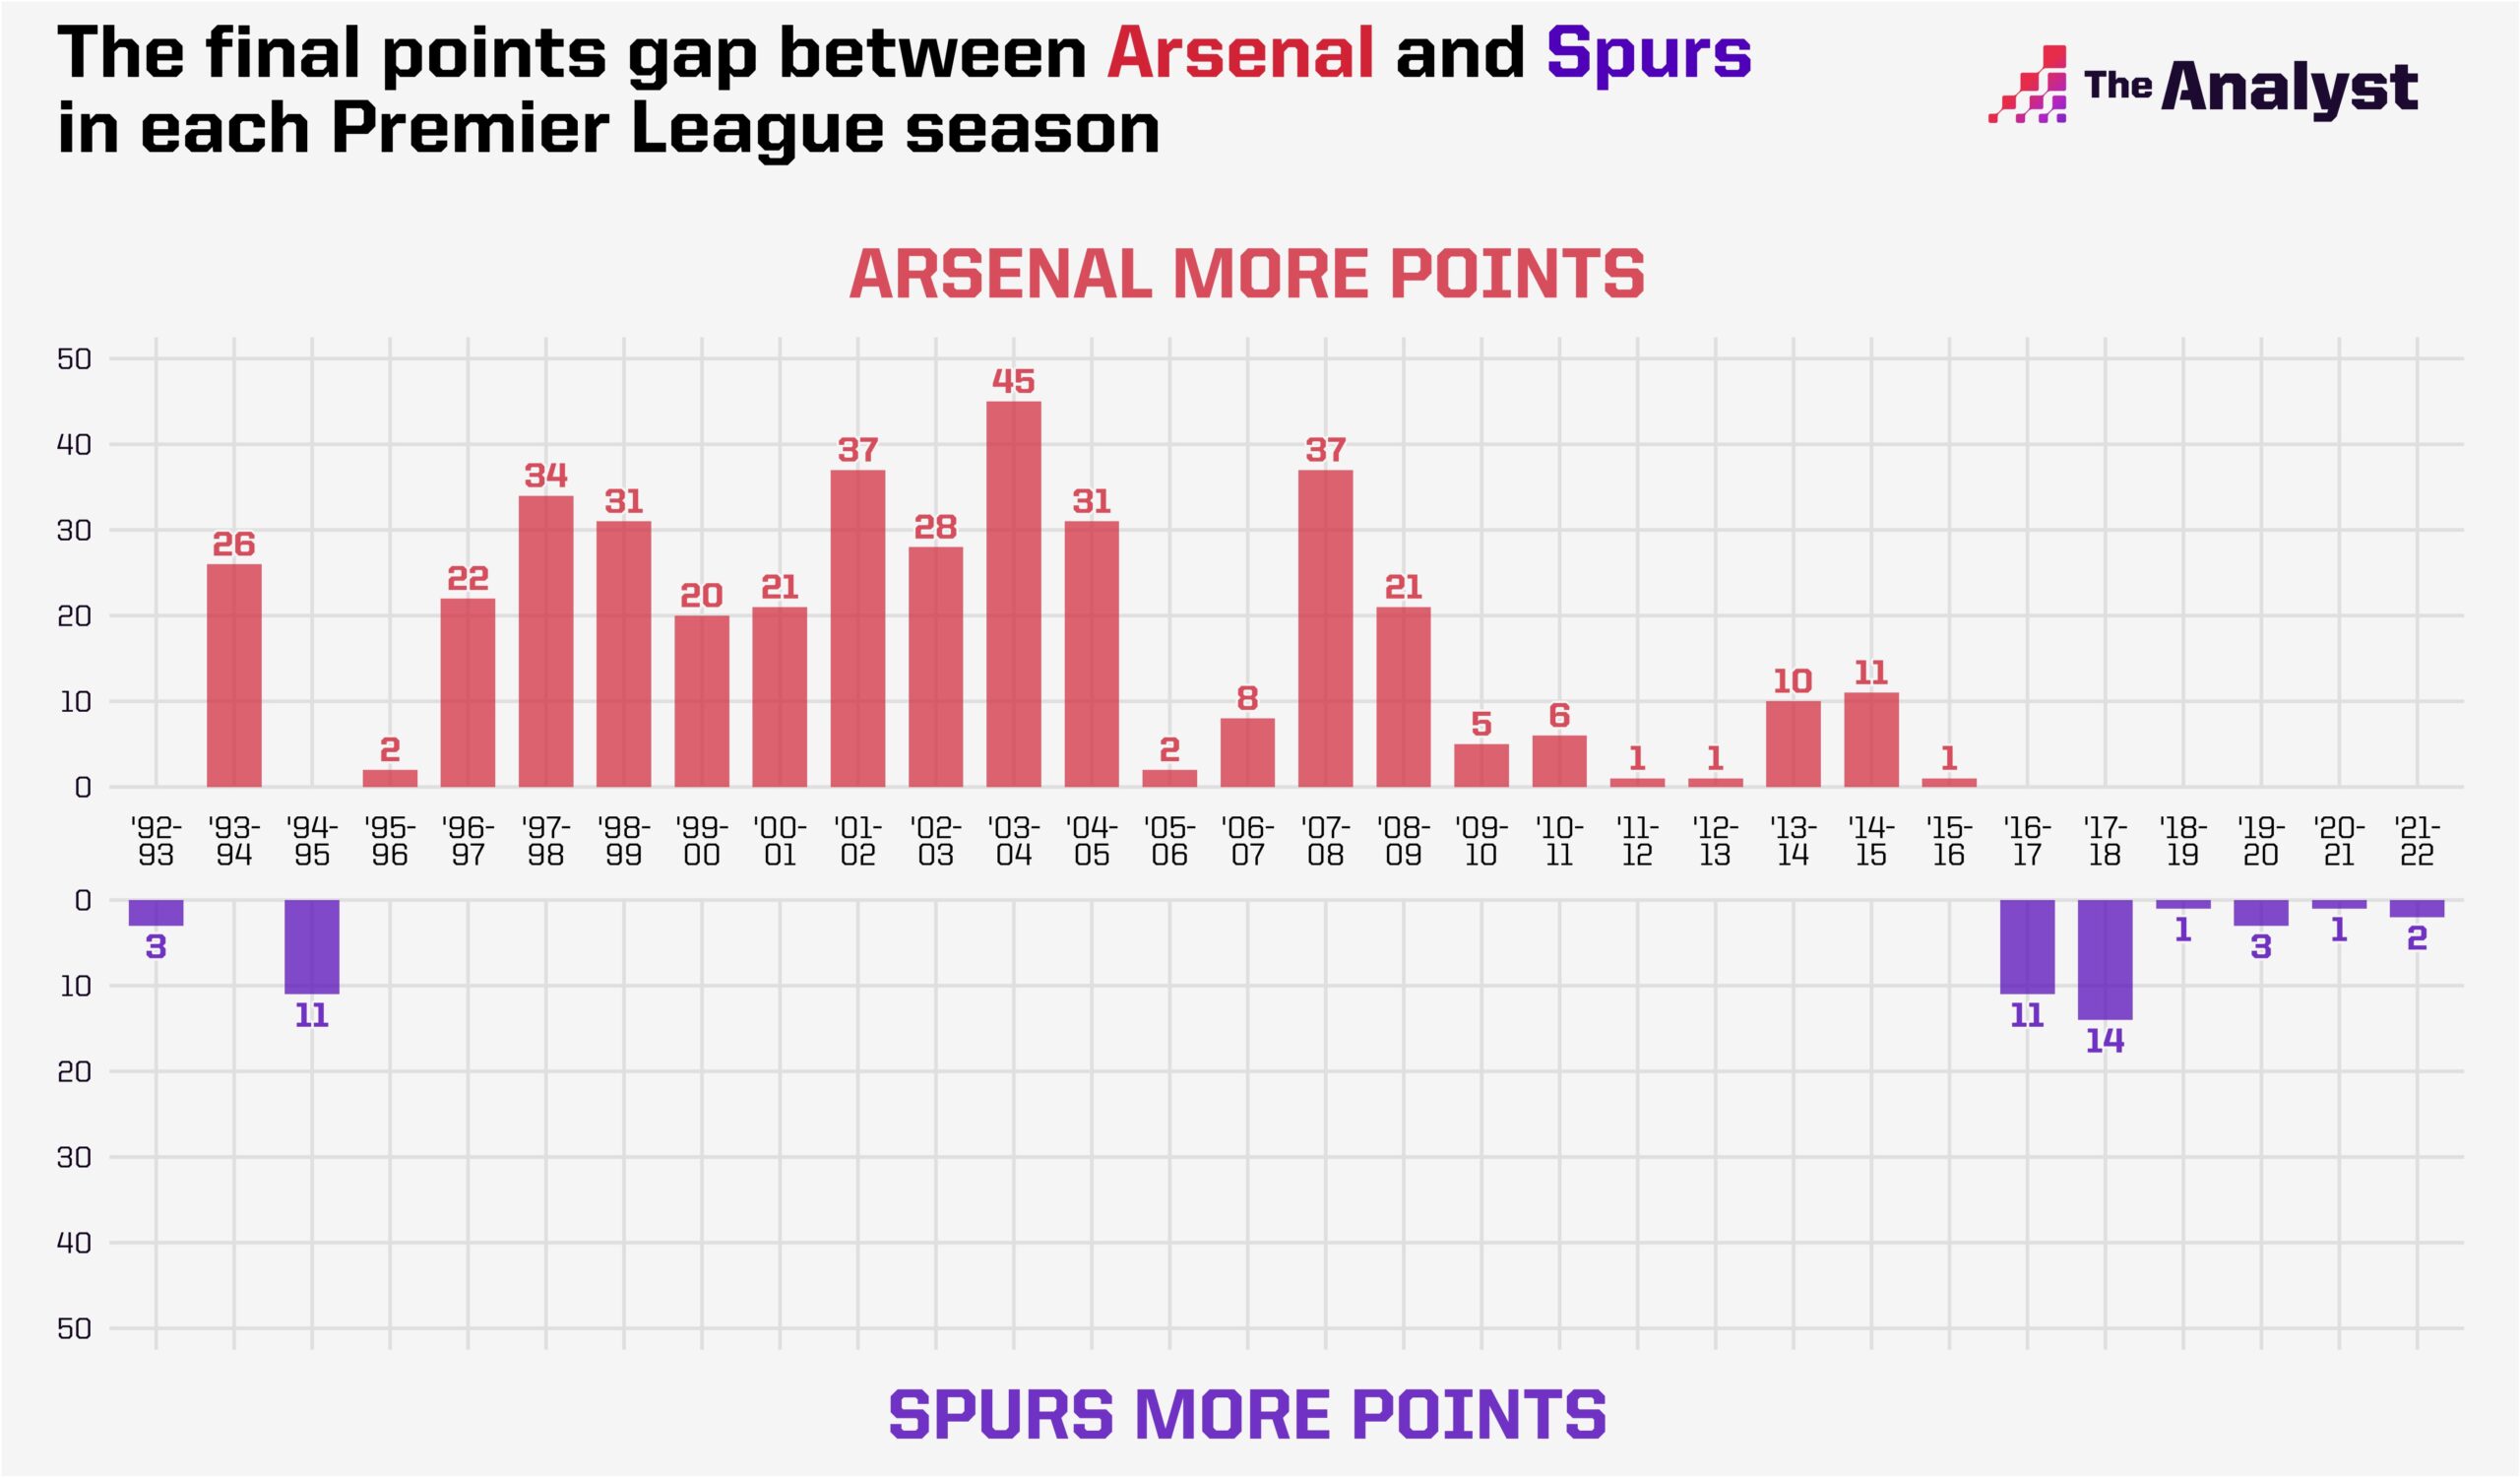 Arsenal and Spurs points gaps in Premier League history.